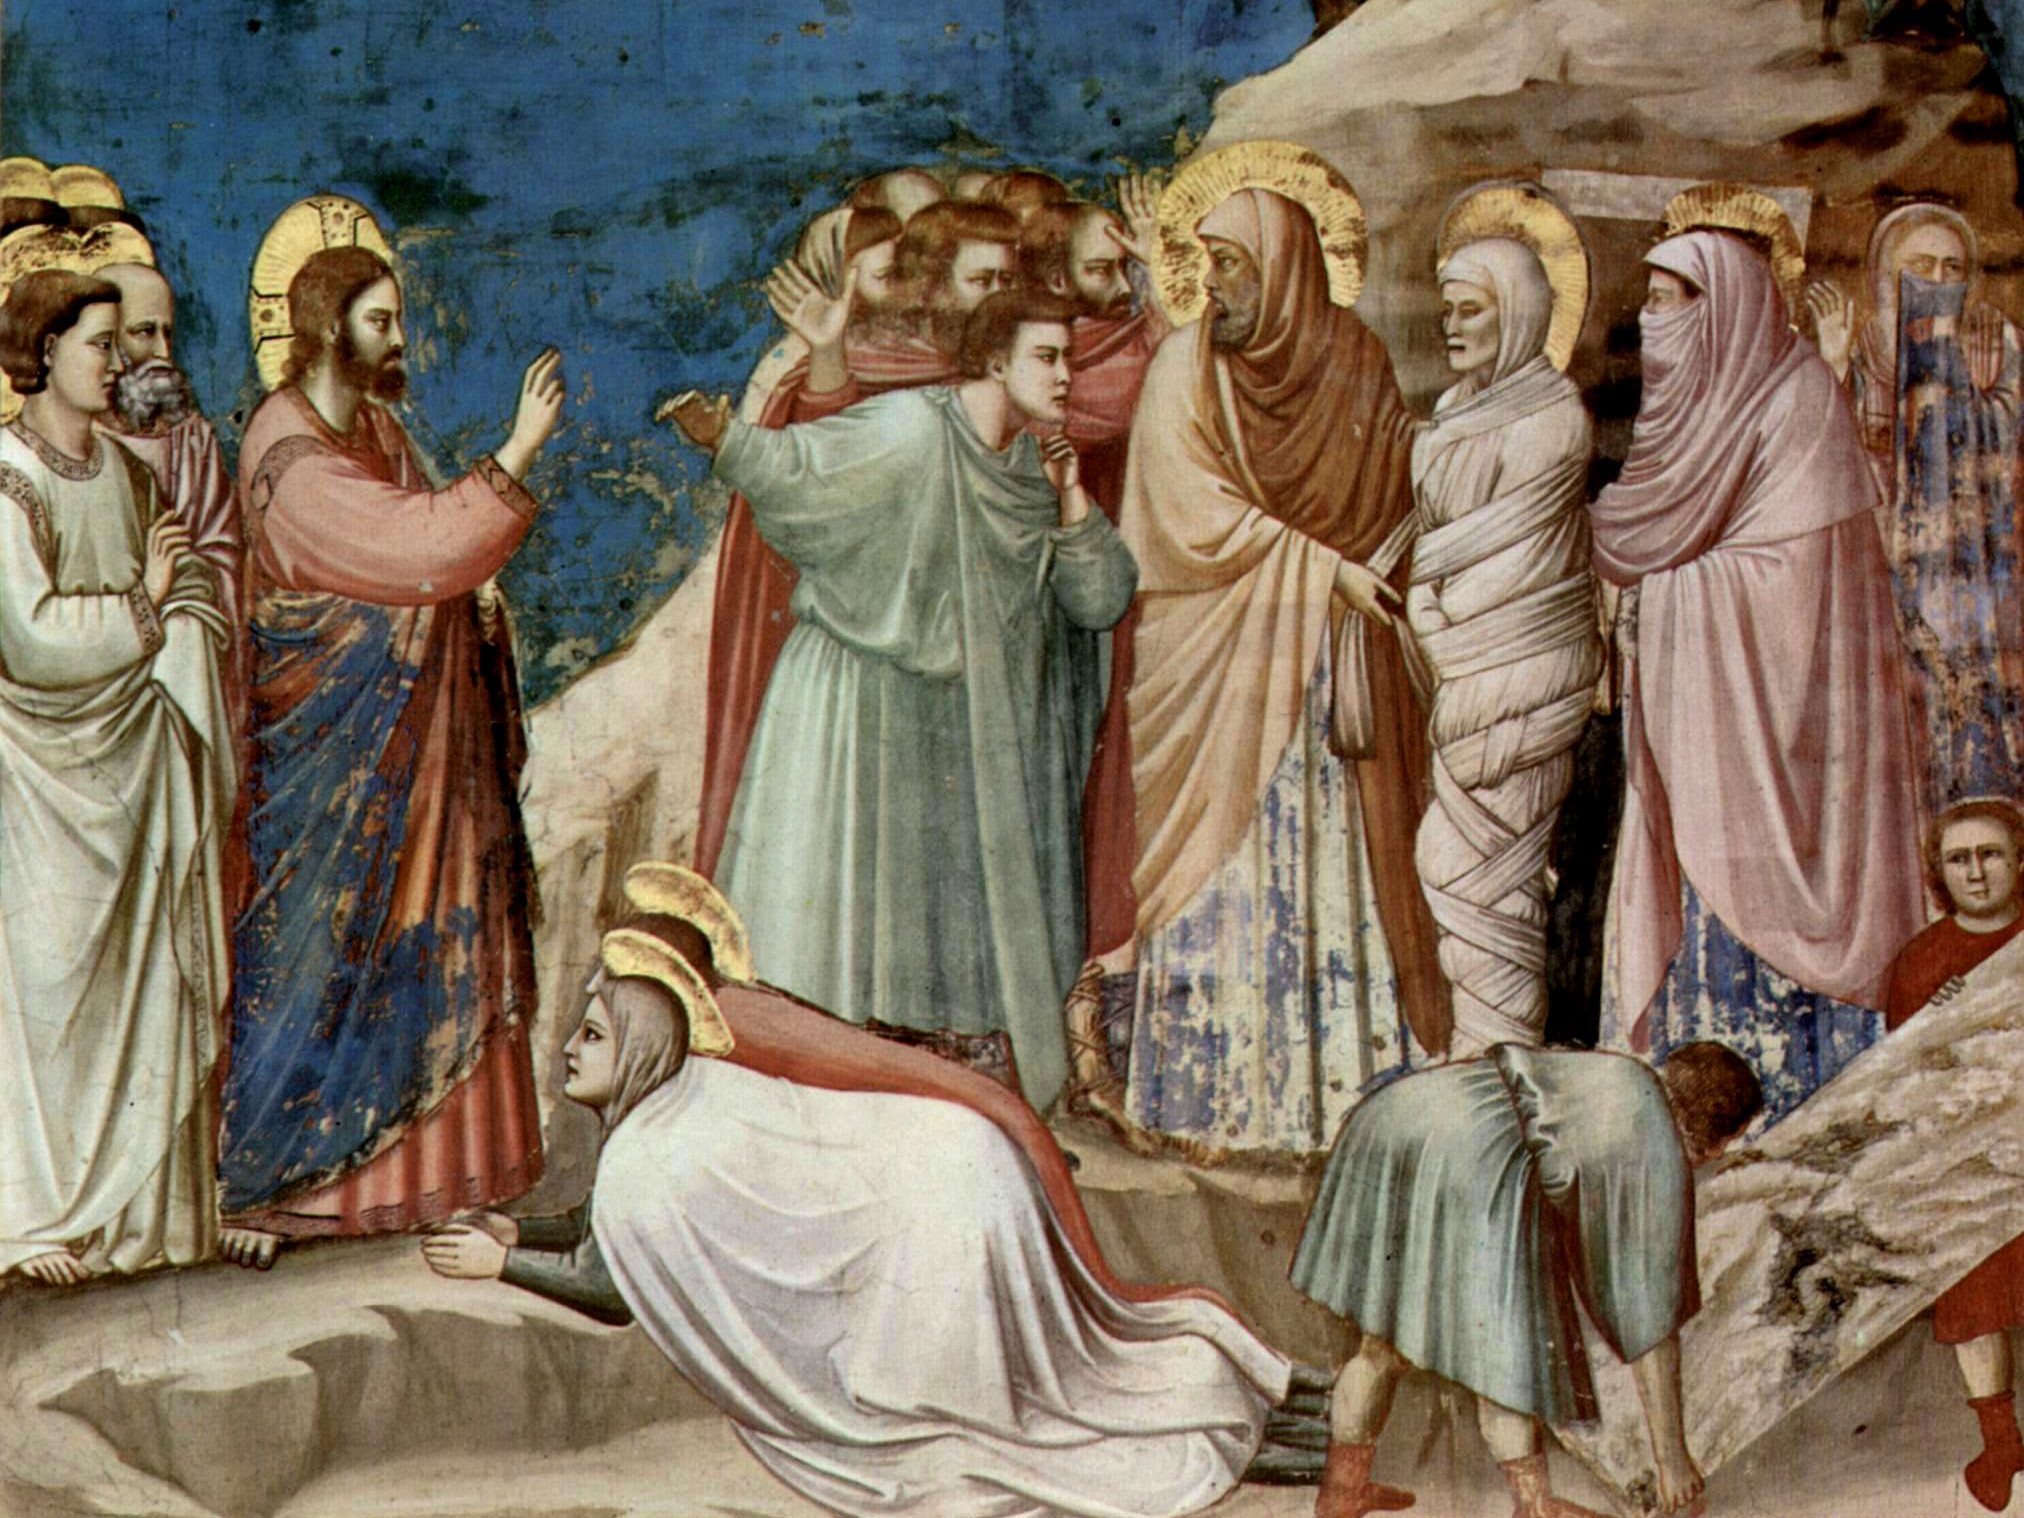 The Raising of Lazarus by Giotto